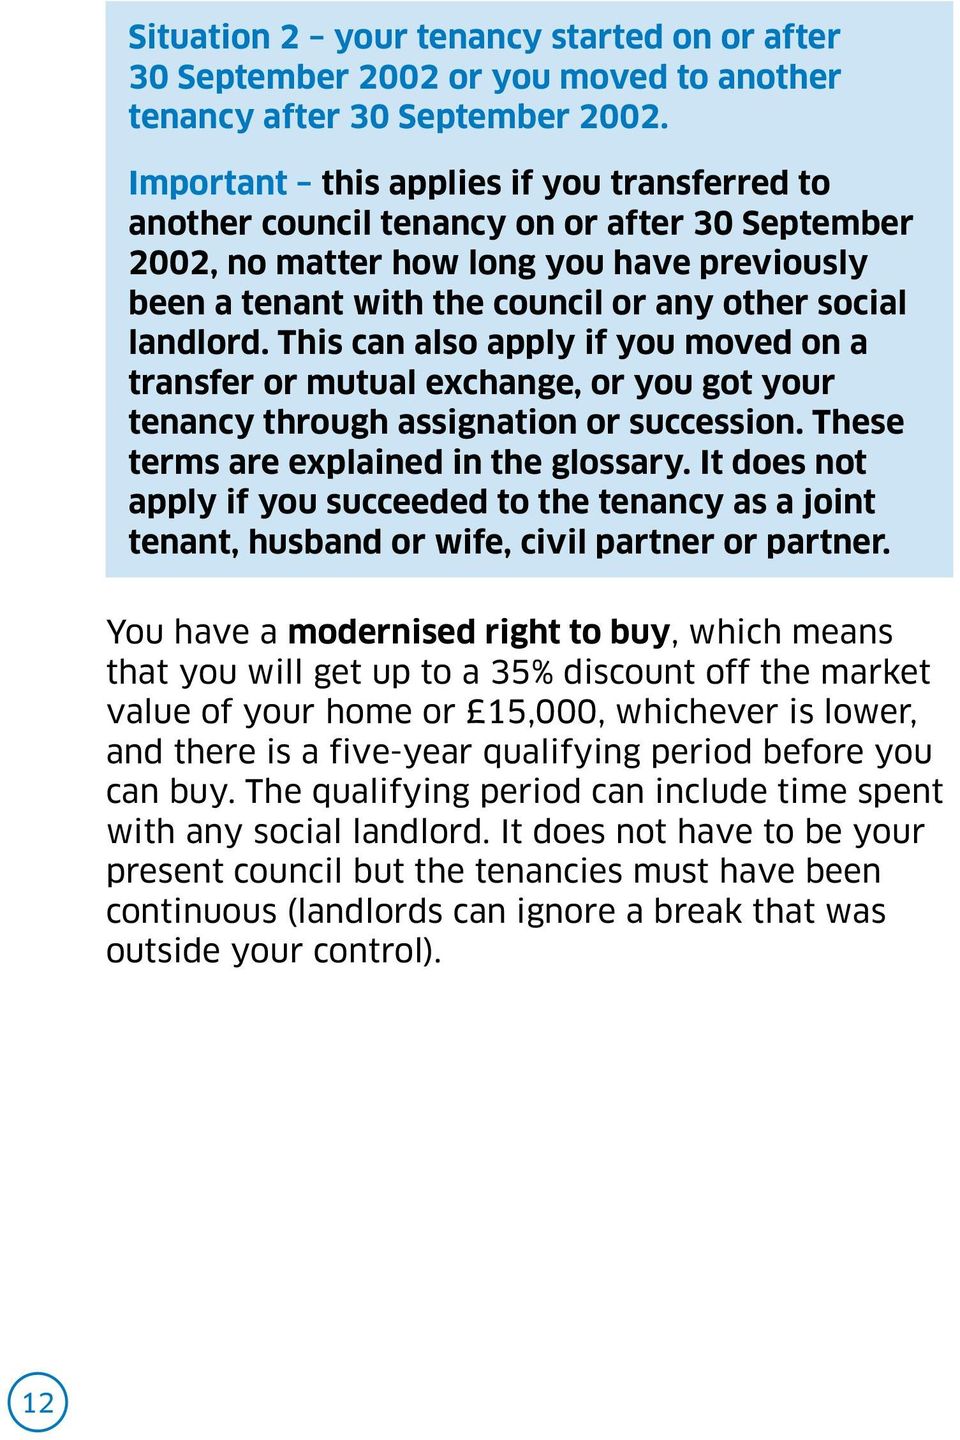 This can also apply if you moved on a transfer or mutual exchange, or you got your tenancy through assignation or succession. These terms are explained in the glossary.